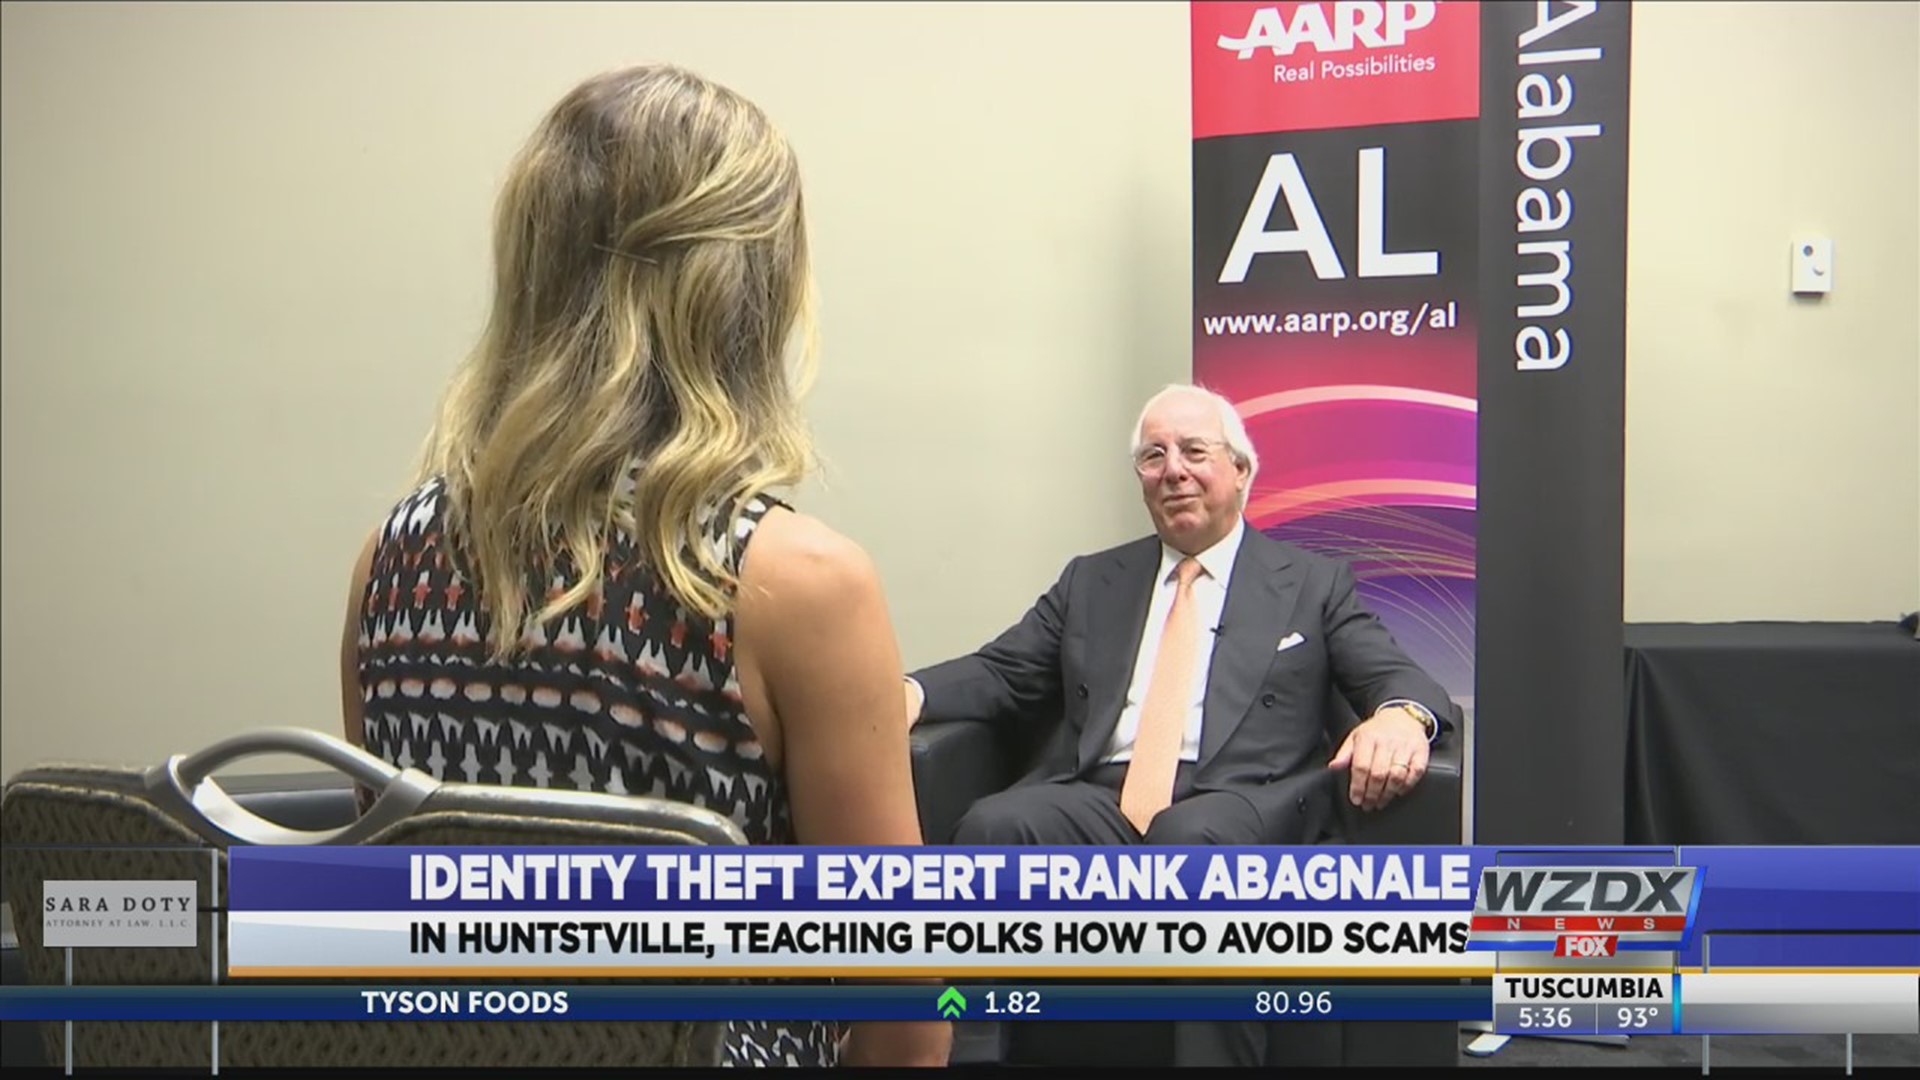 Many people know Frank Abagnale because of the 2002 film "Catch Me if You Can."